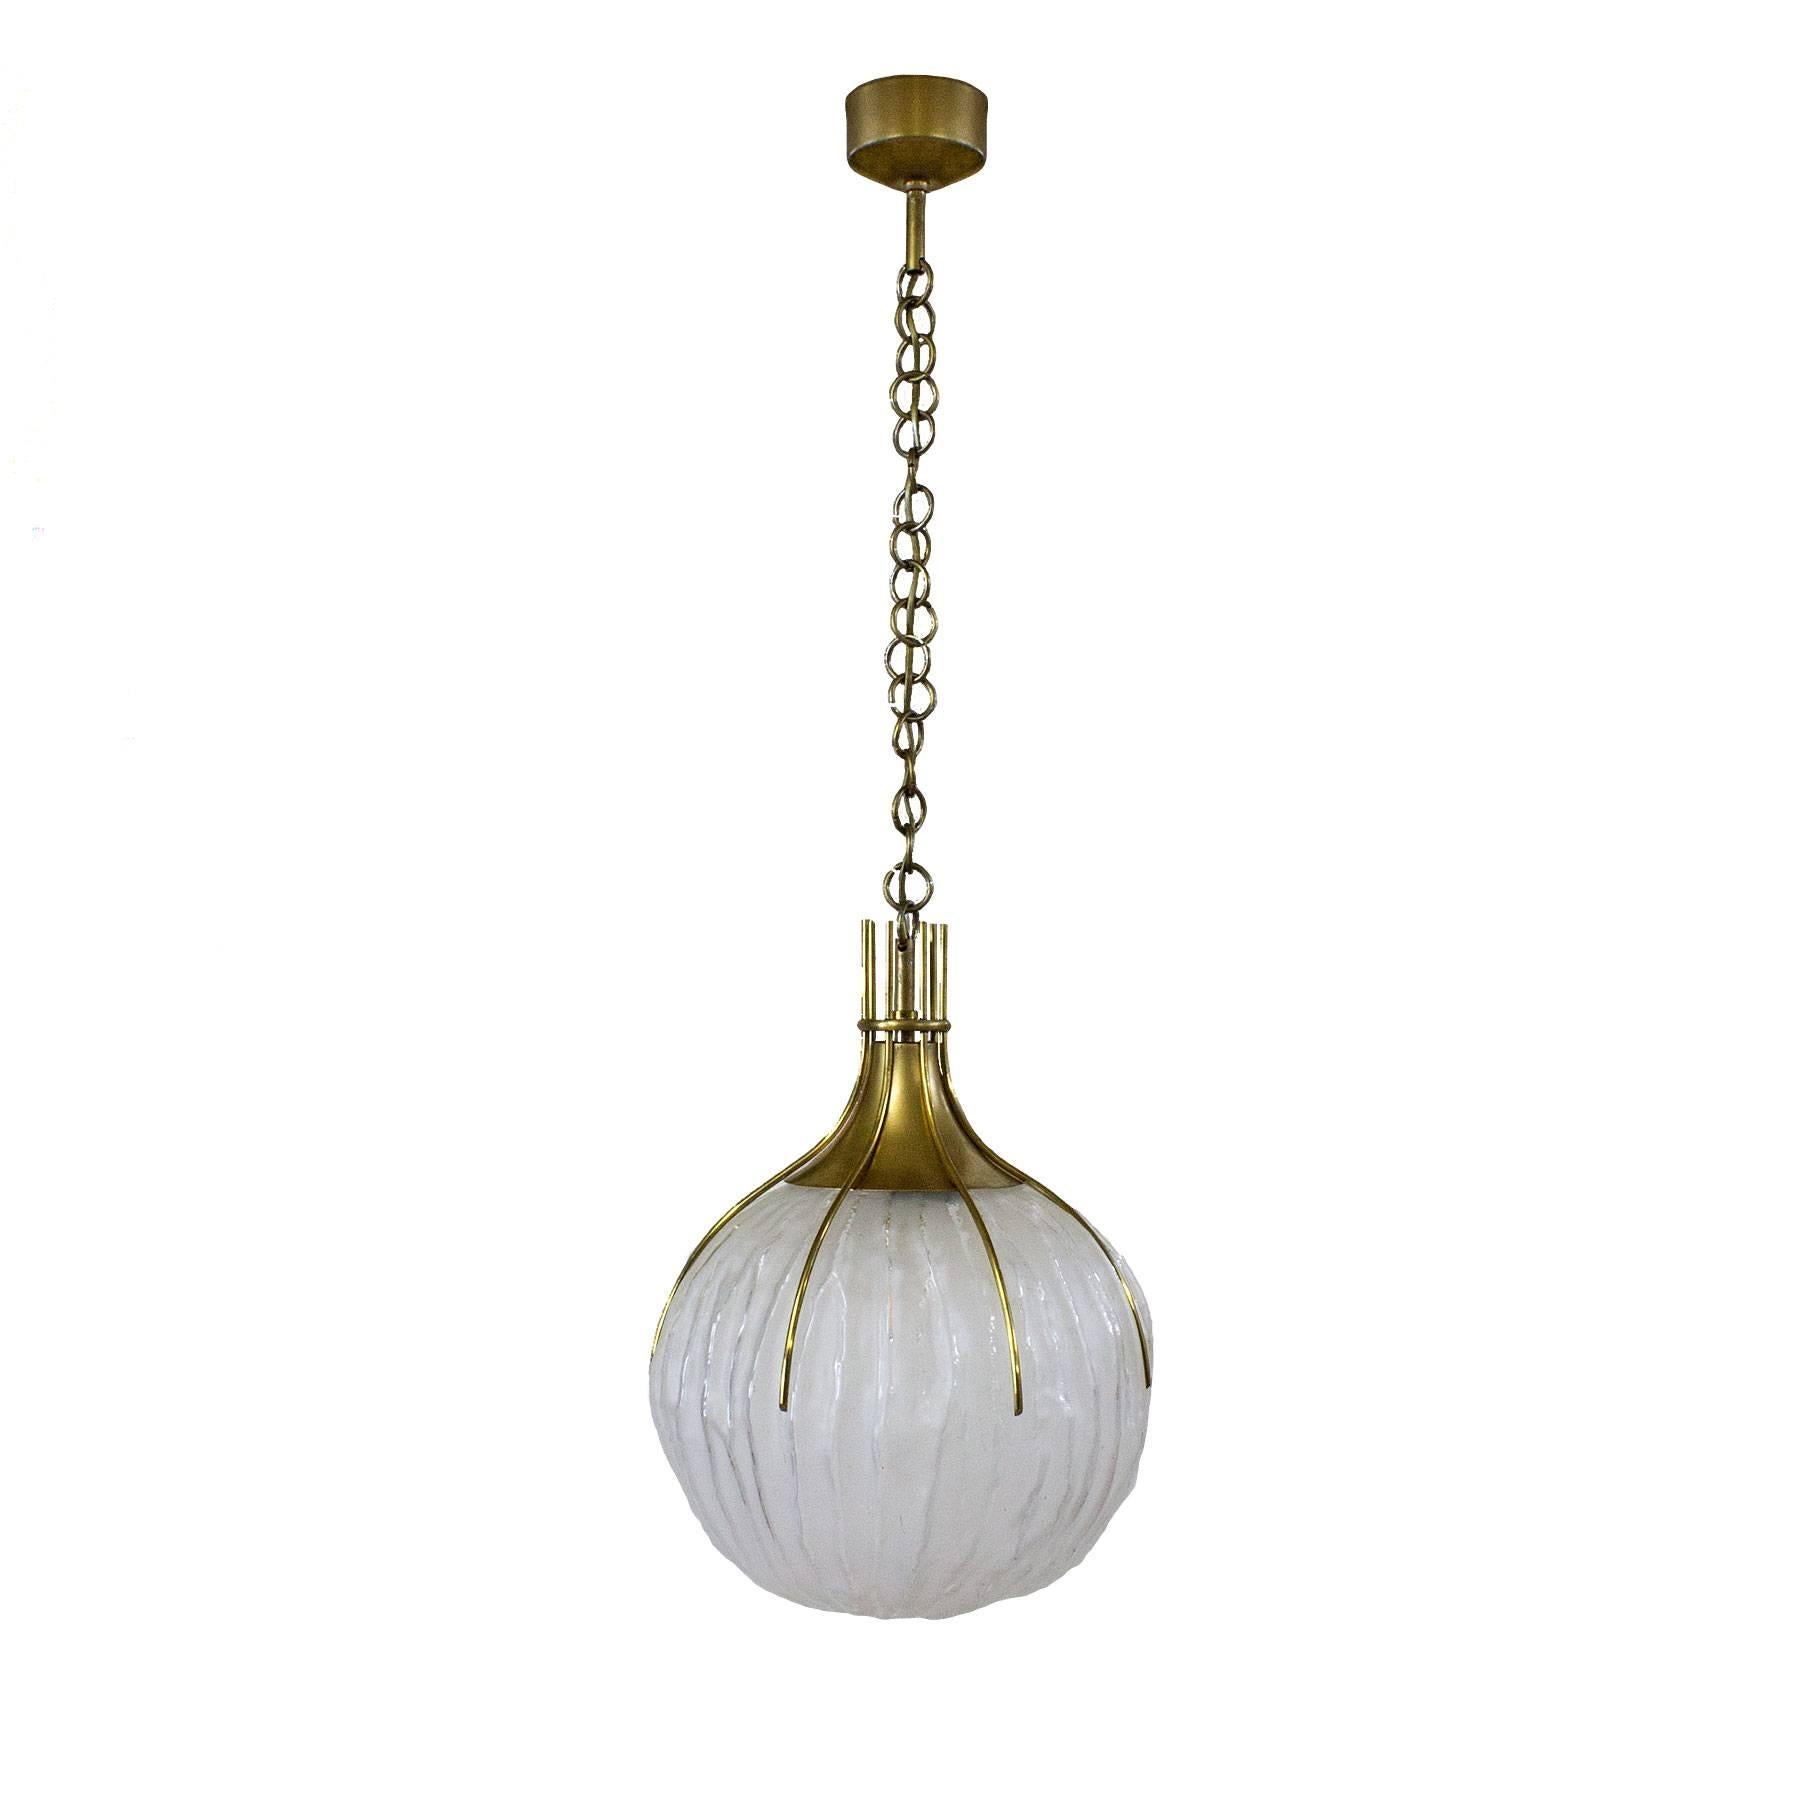  Mid-Century Modern Hanging Lantern by Esperia, Moulded Etched Glass - Italy